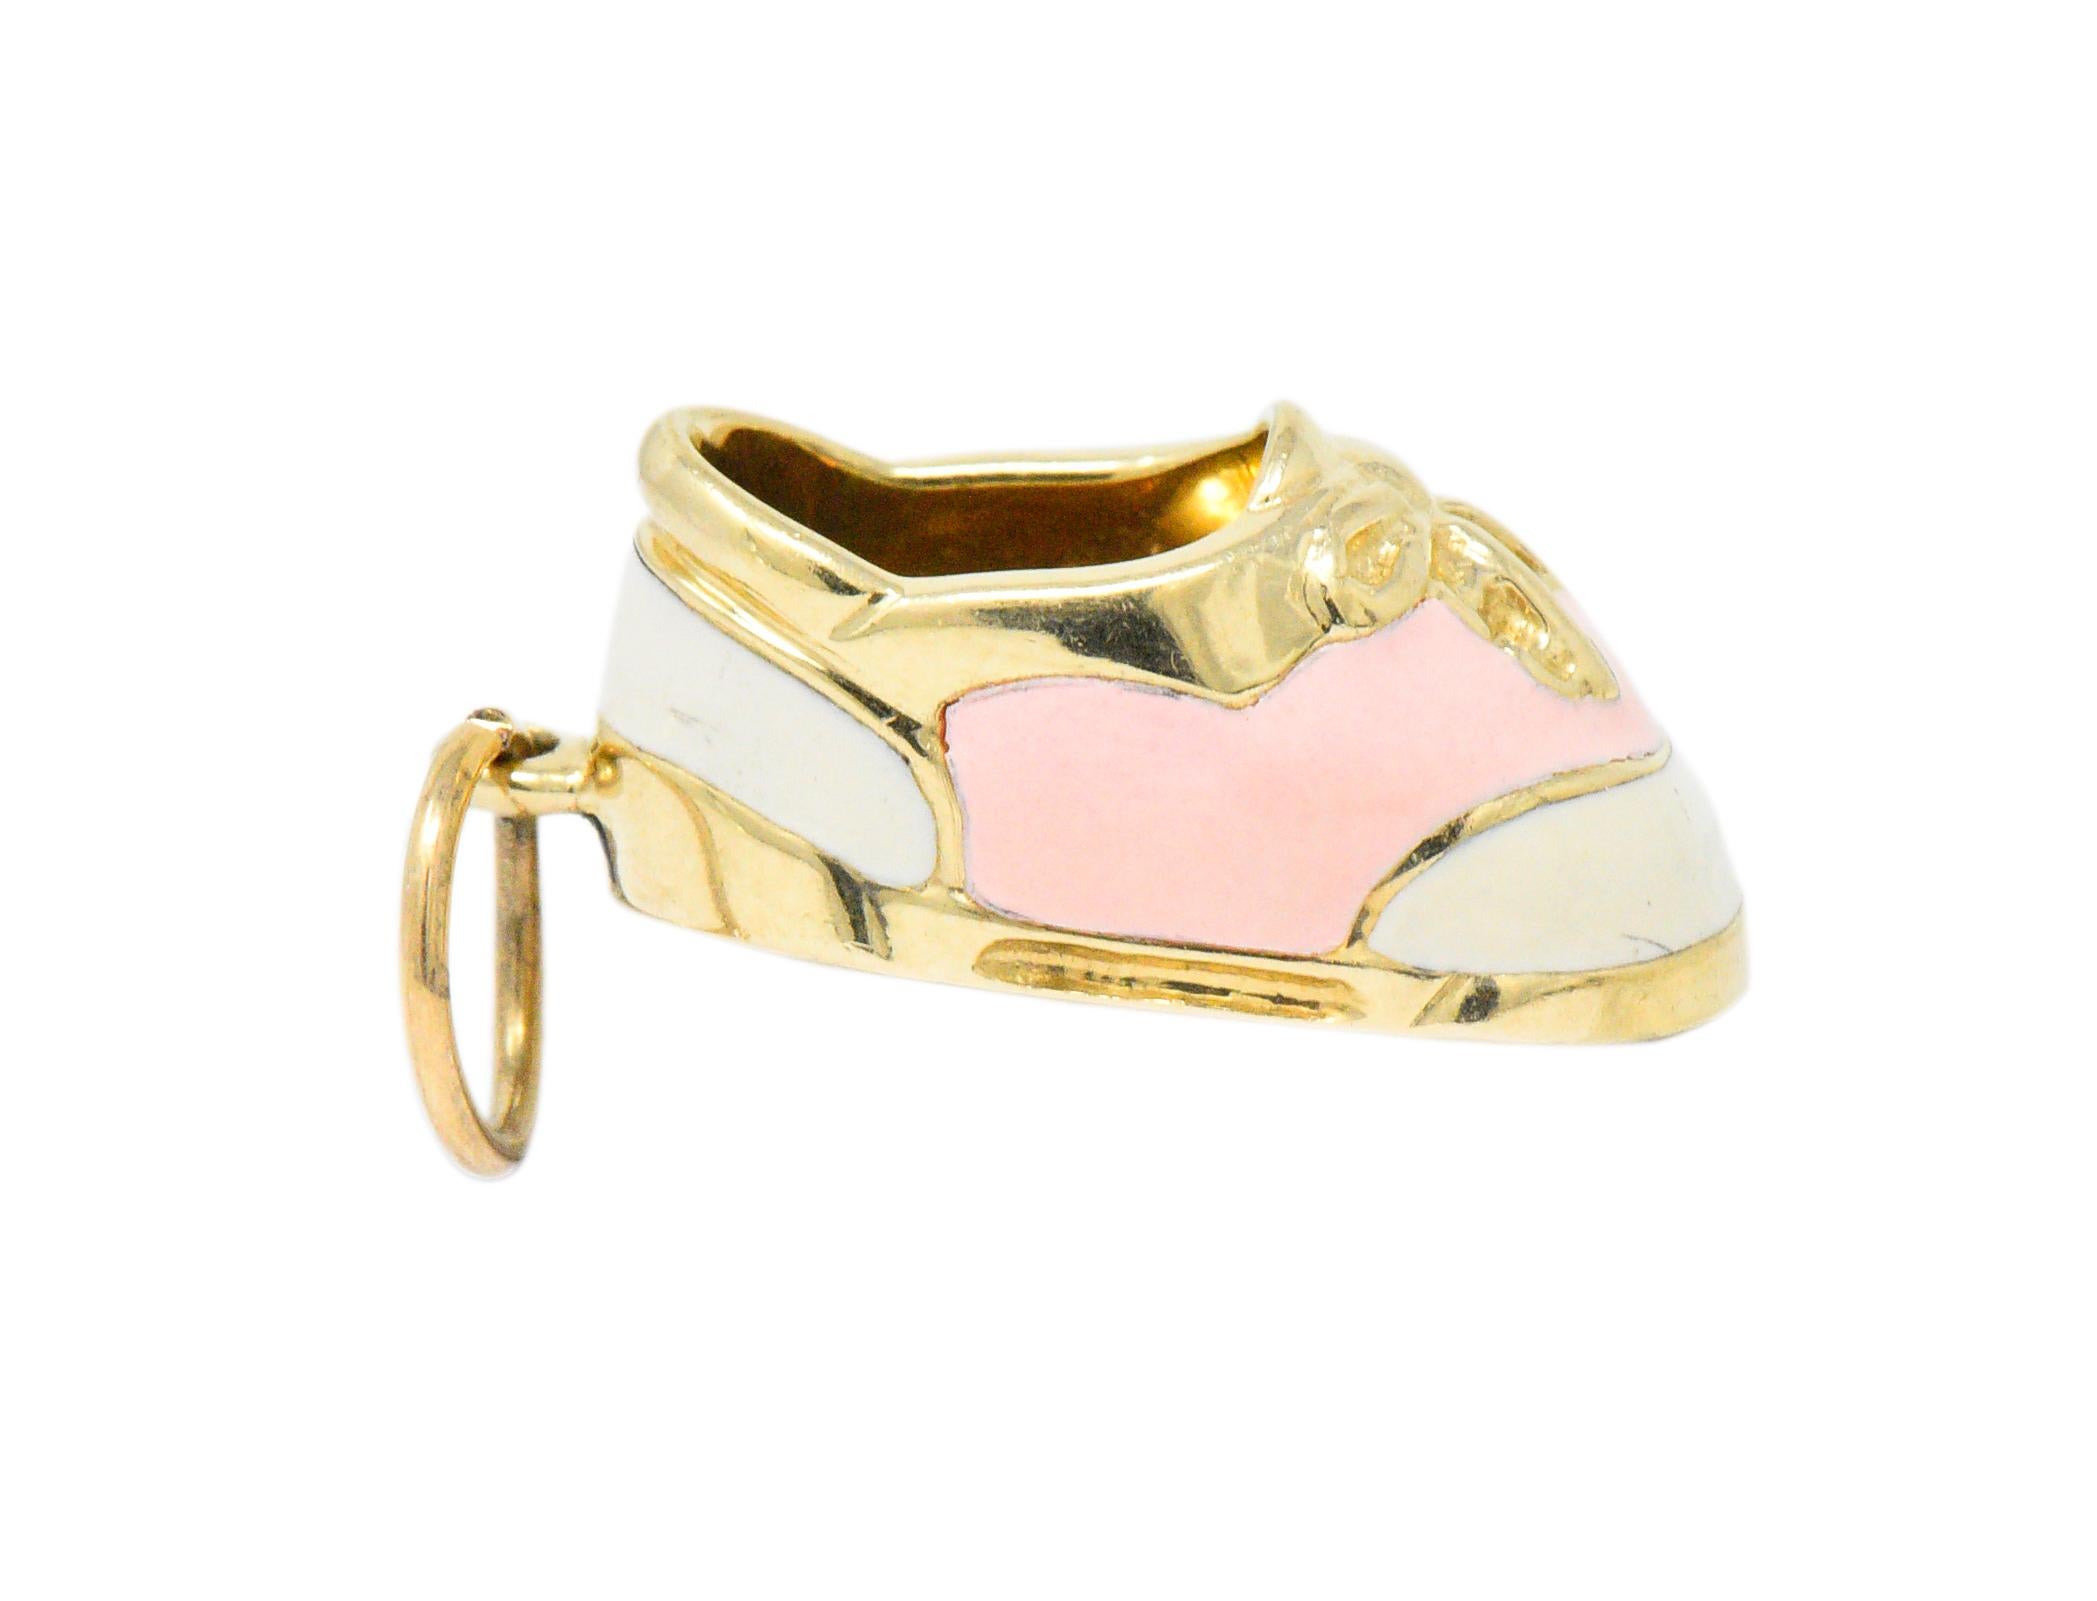 Featuring a dimensional 14k gold charm depicting a saddle shoe with laces tied in a bow

Adorned with pale pink and cream enameling

Measuring 11/16